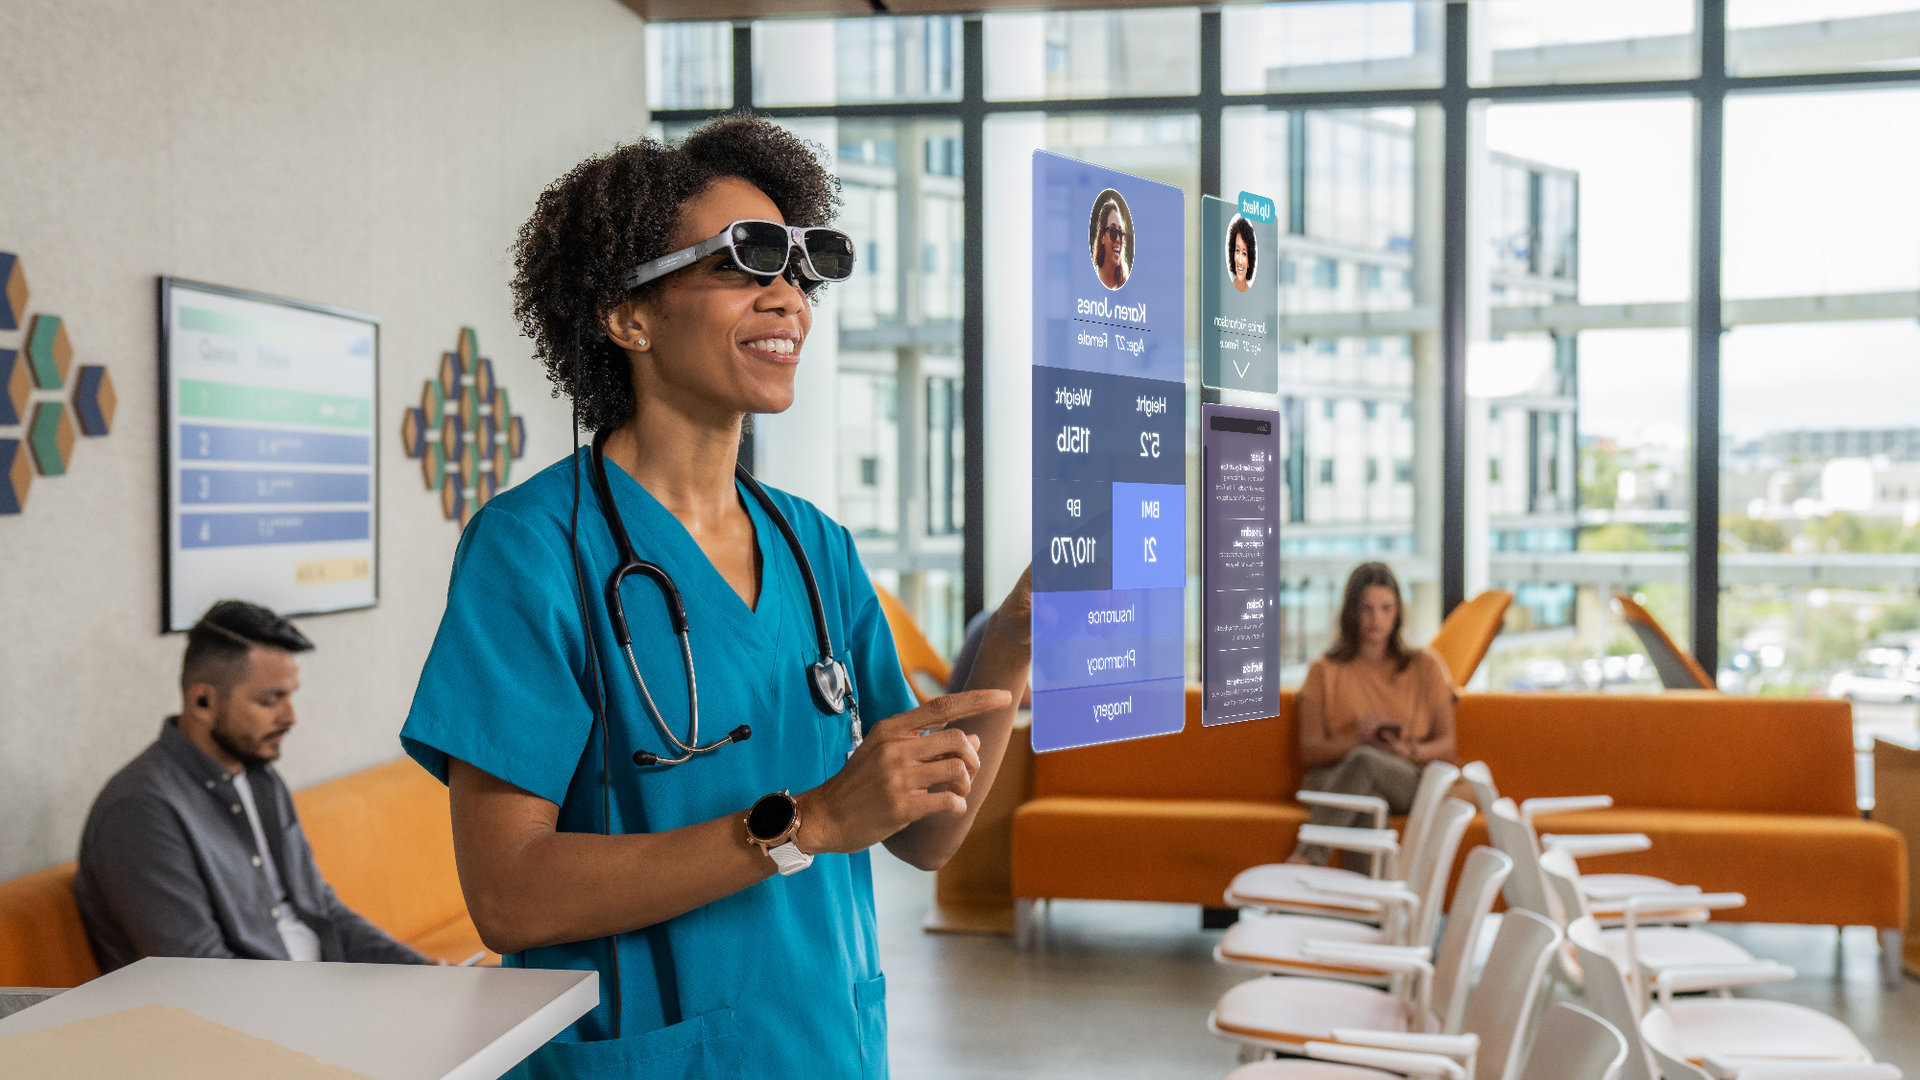 Nurse Reading Charts With AR Glasses Before Calling Patient 2